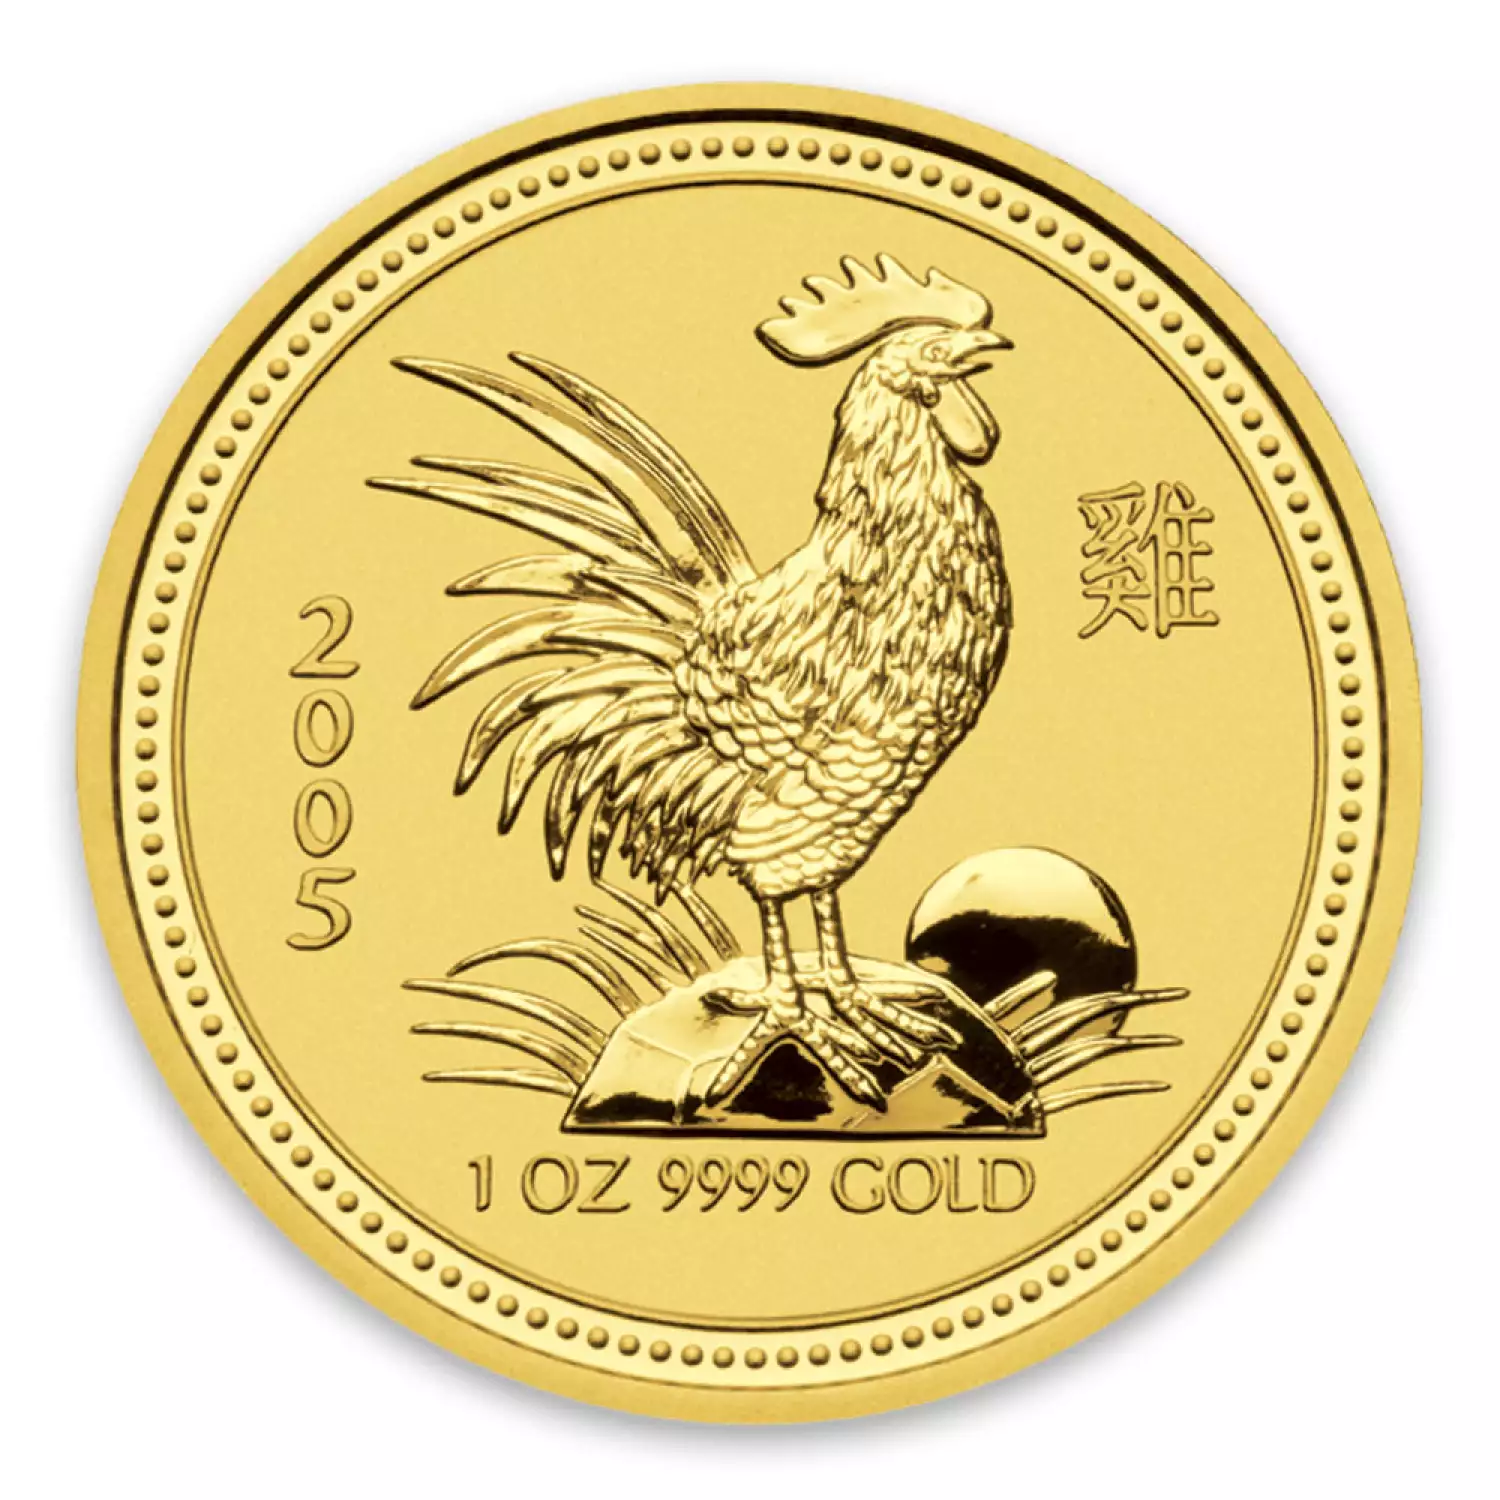 2005 1 oz Australian Perth Mint Gold Lunar: Year of the Rooster (2)